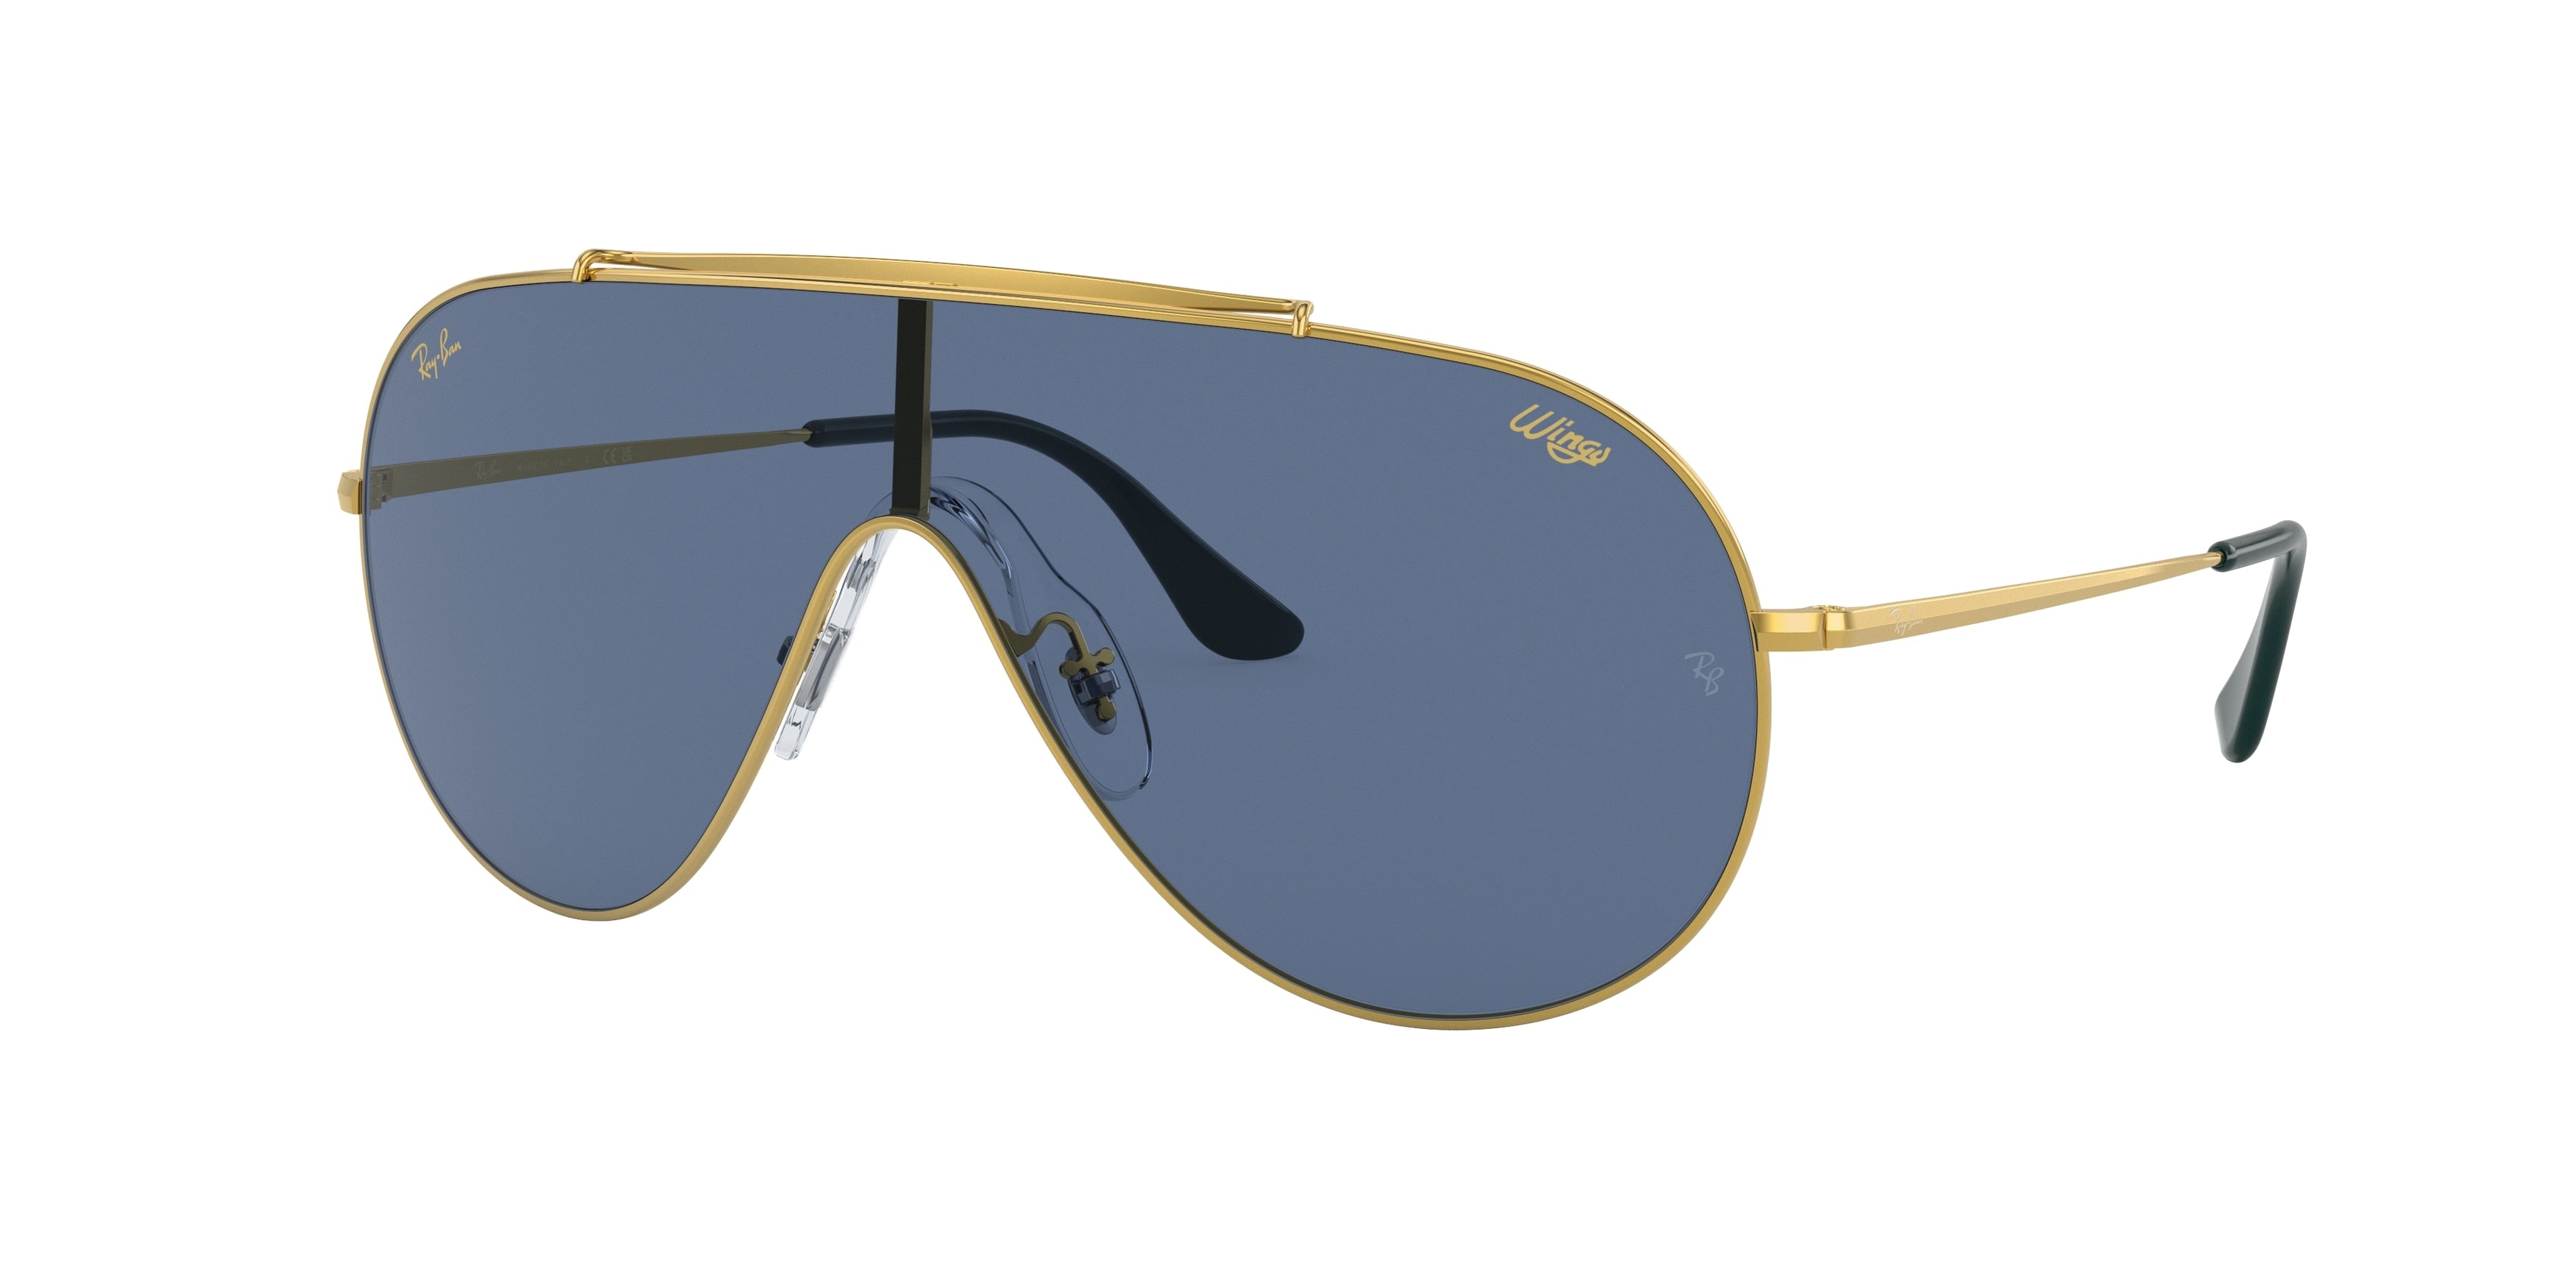 Ray-Ban WINGS RB3597 Pilot Sunglasses  924580-Gold 33-140-133 - Color Map Gold